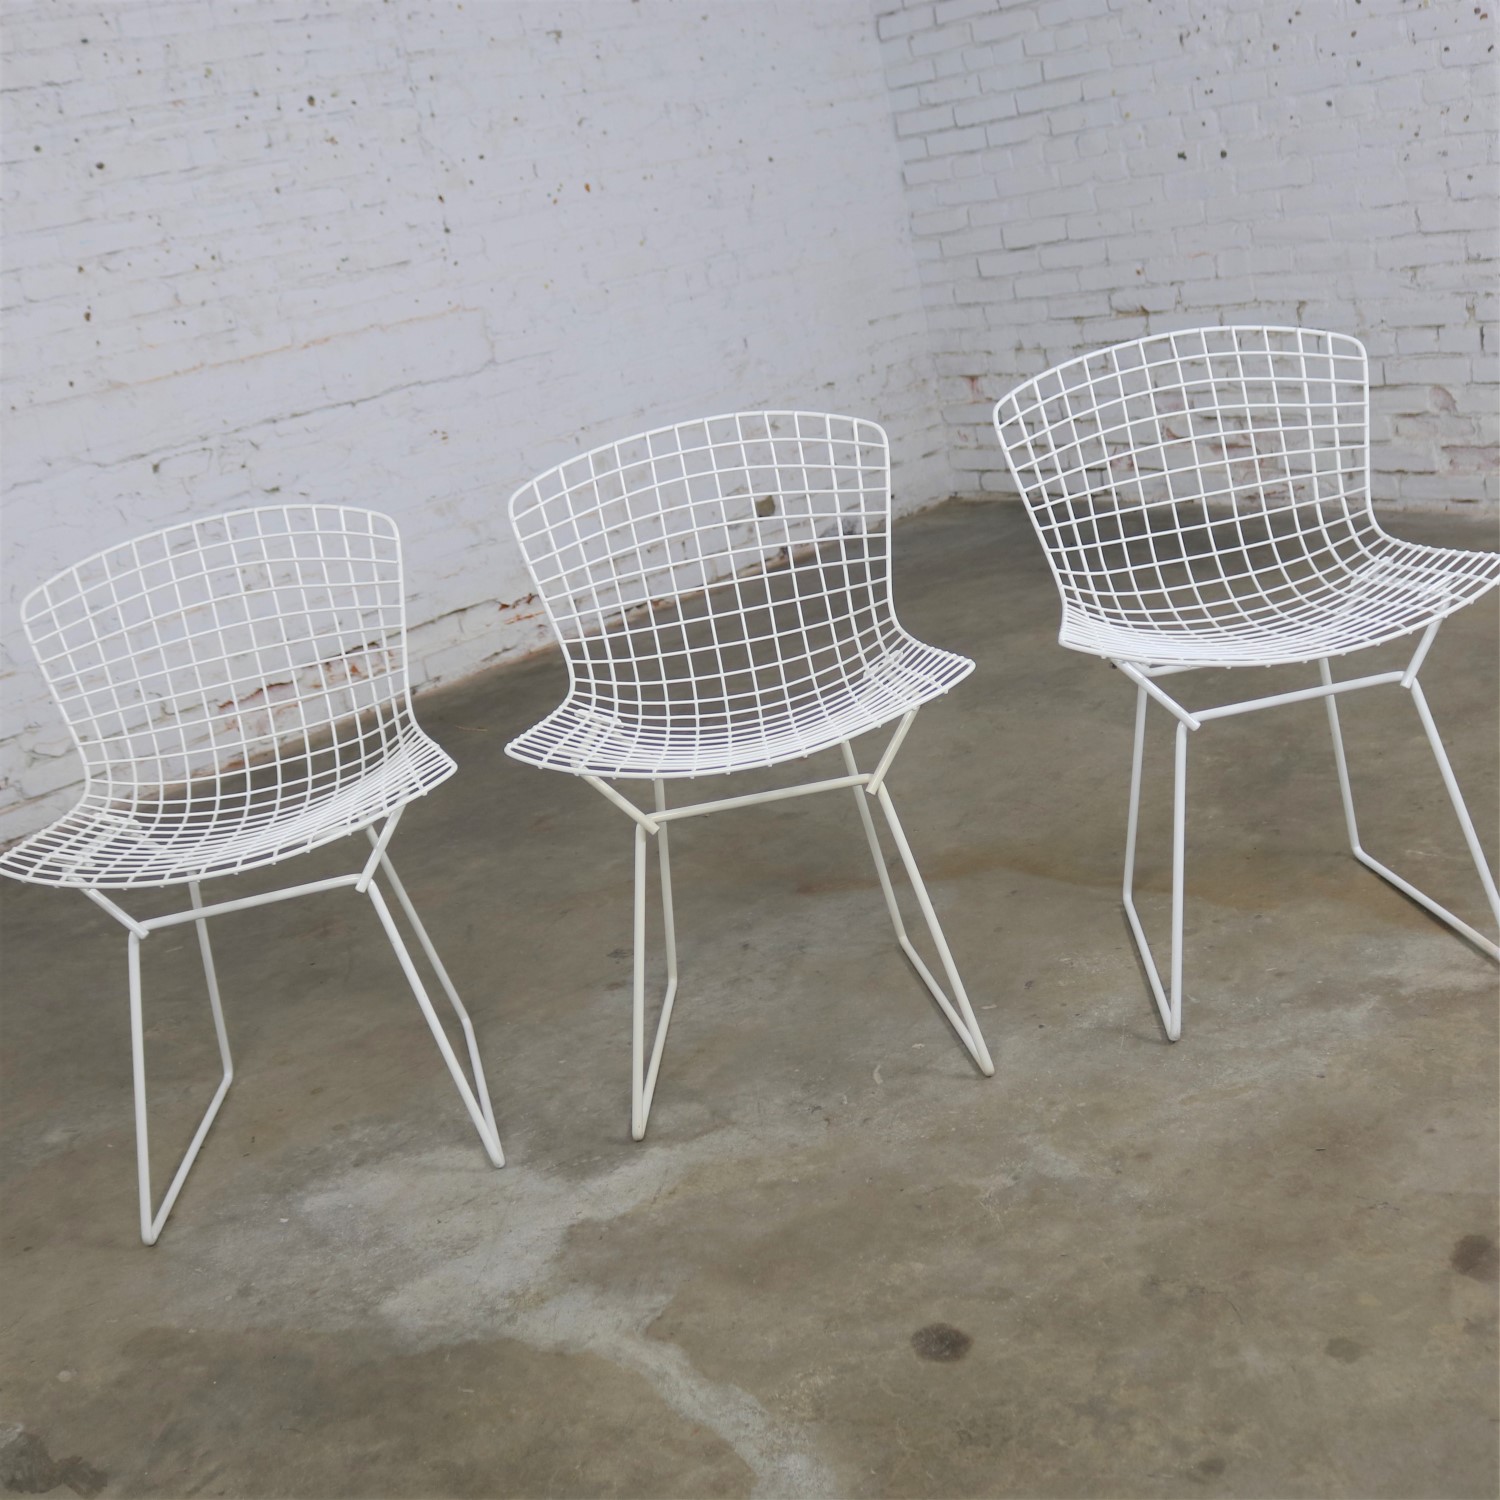 Vintage Mid-Century Modern Bertoia White Wire Side Chairs w/Purple Seat Cushions